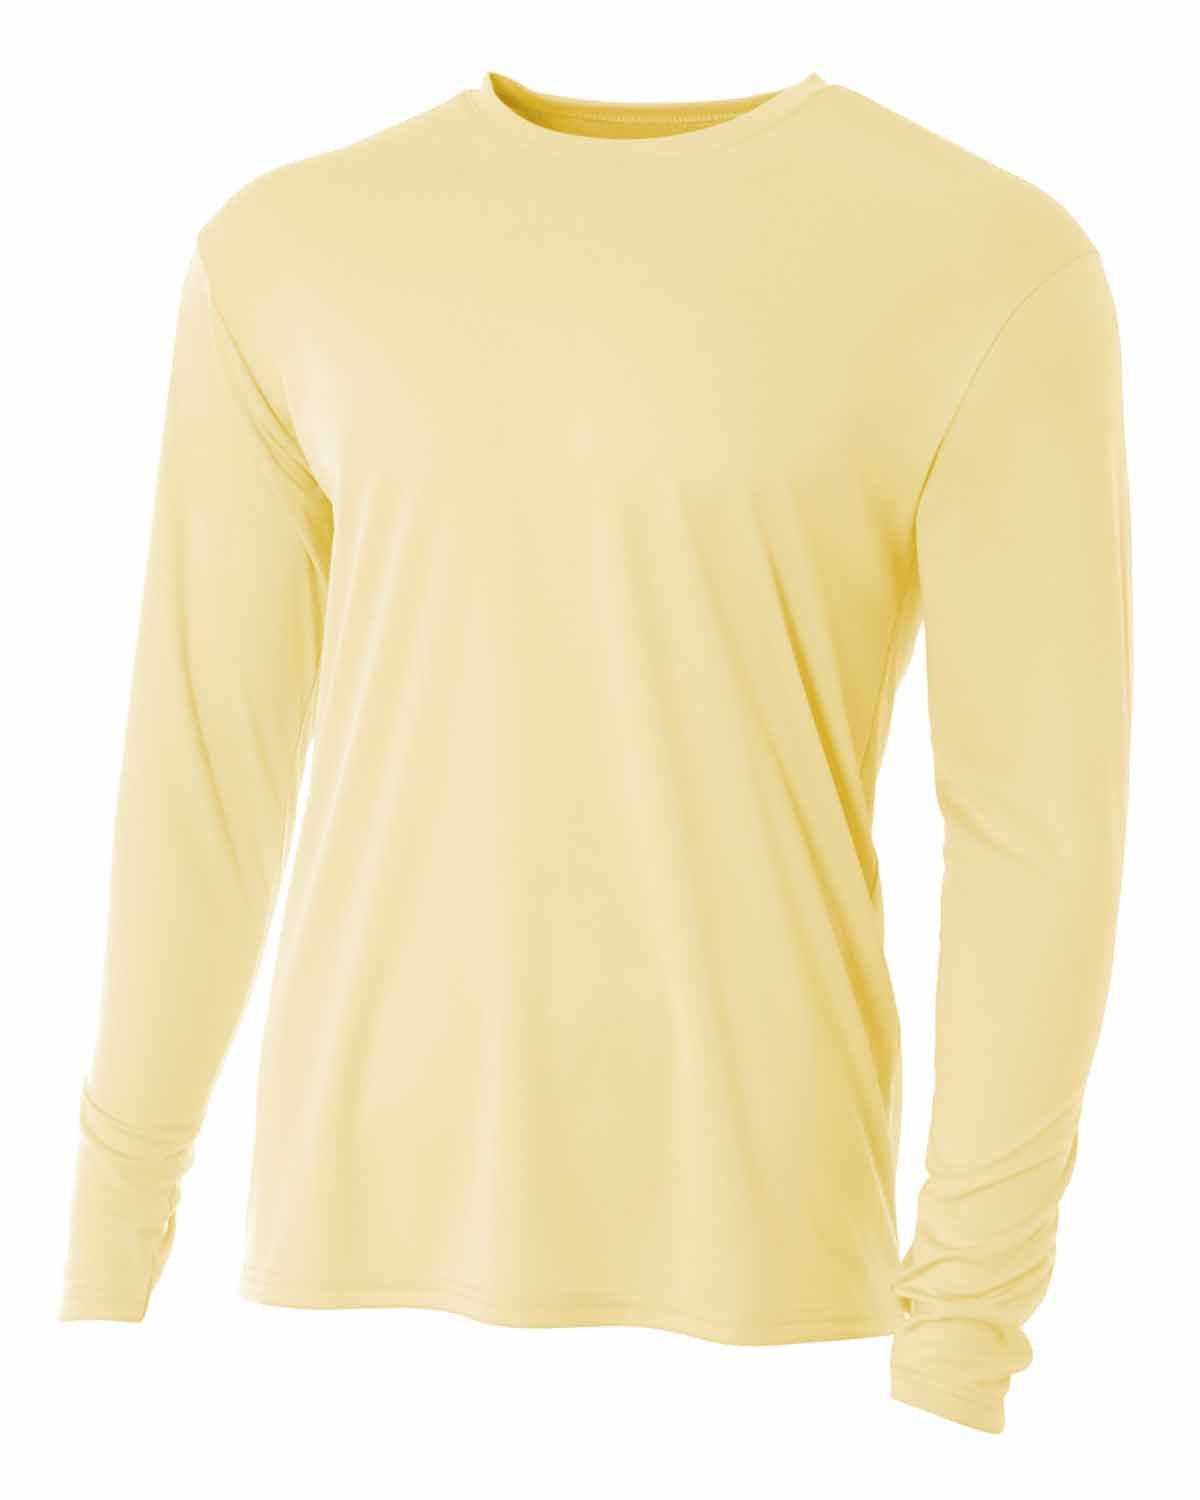 A4 Youth Long Sleeve Cooling Performance Crew Shirt LIGHT YELLOW 